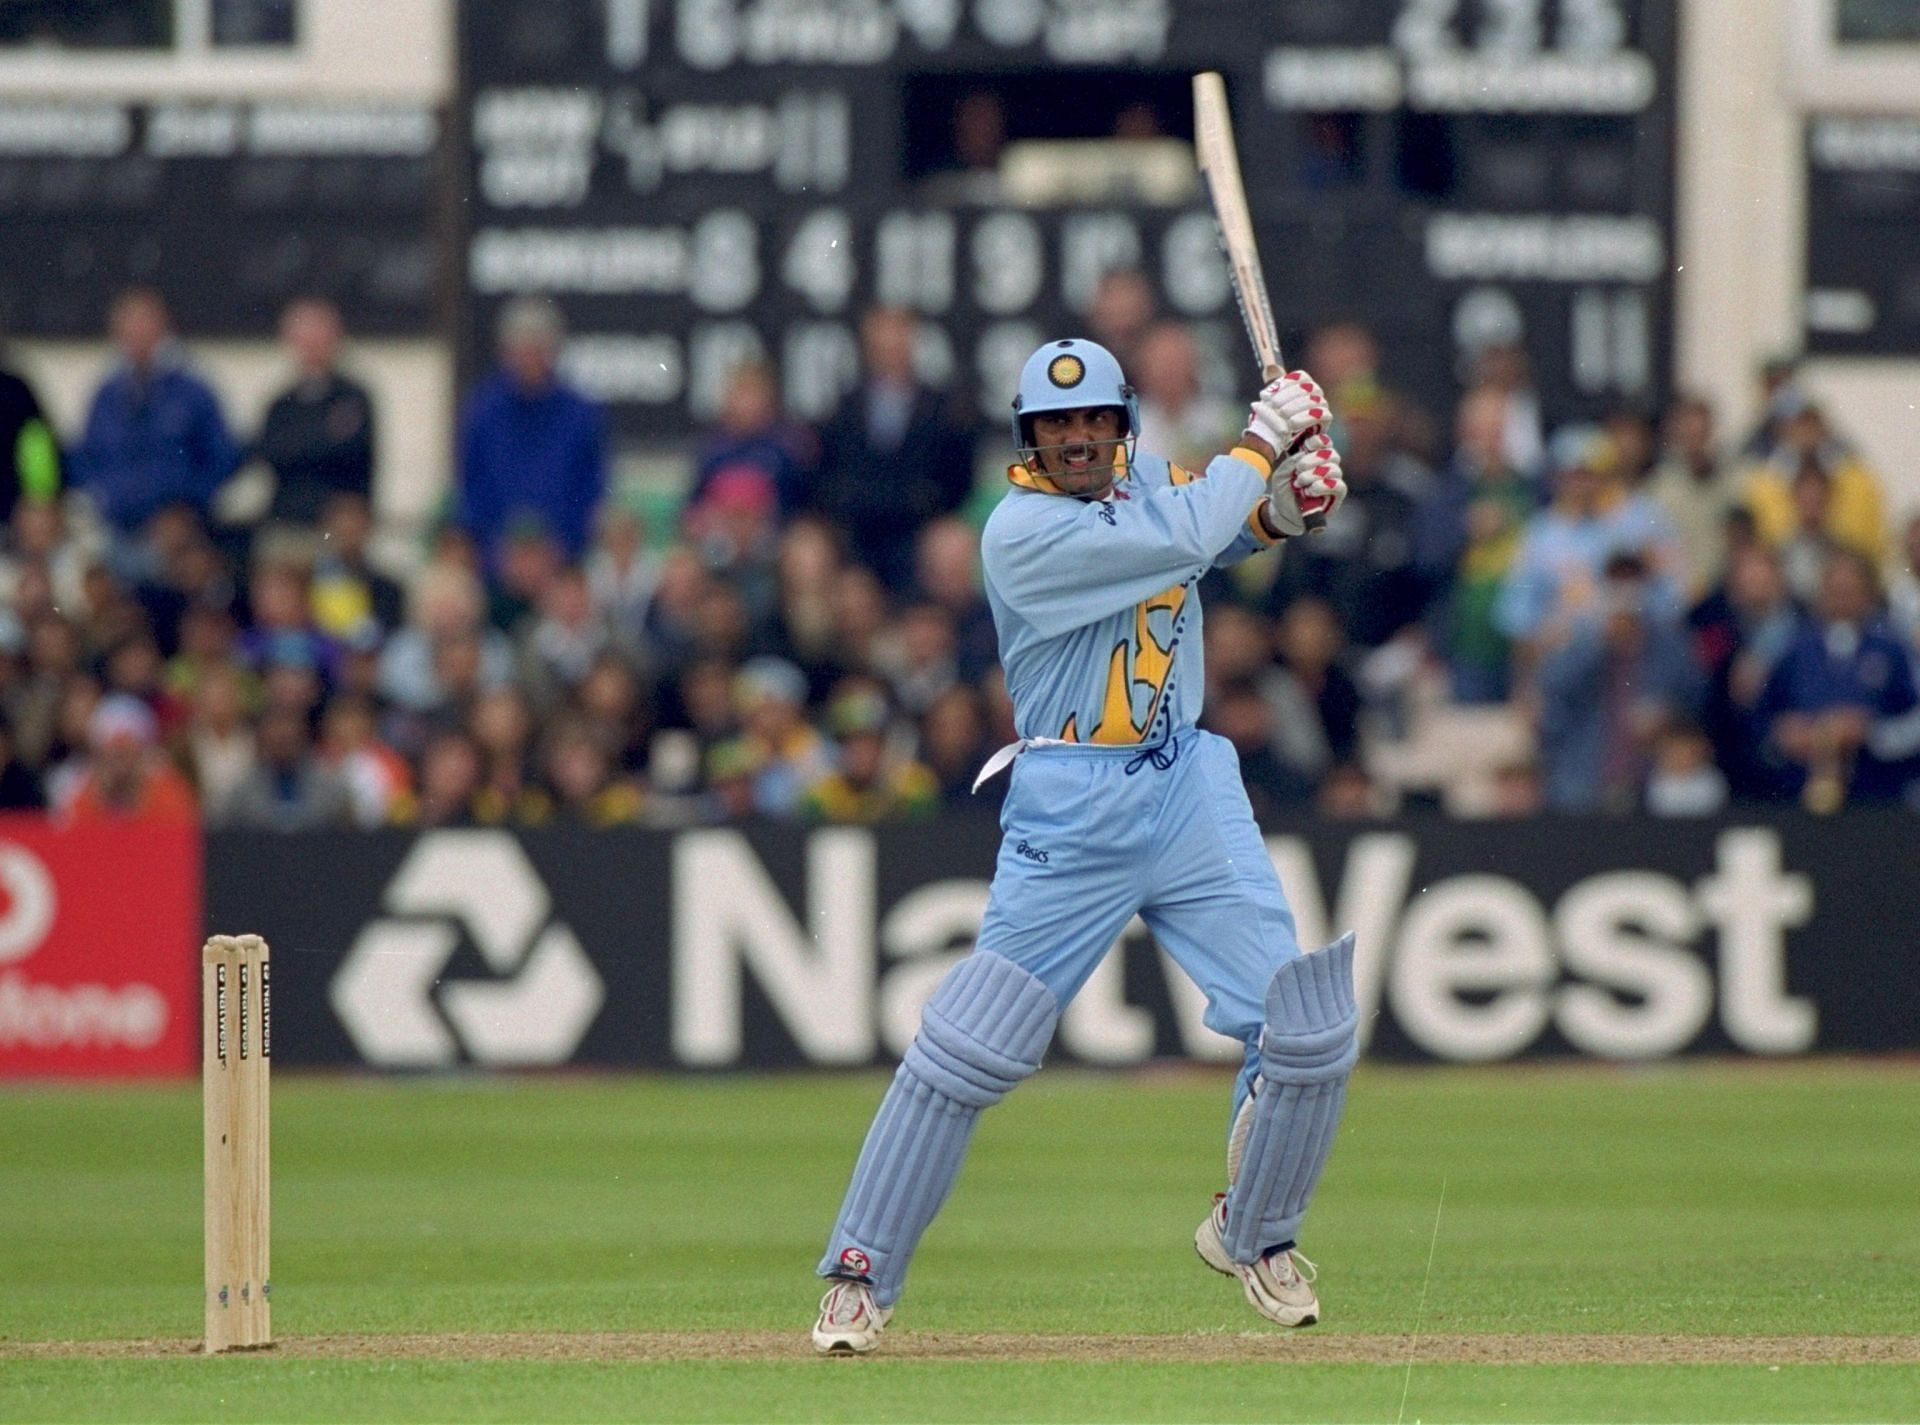 Mohammed Azharuddin playing square cut in an ODI in England [Getty Images]